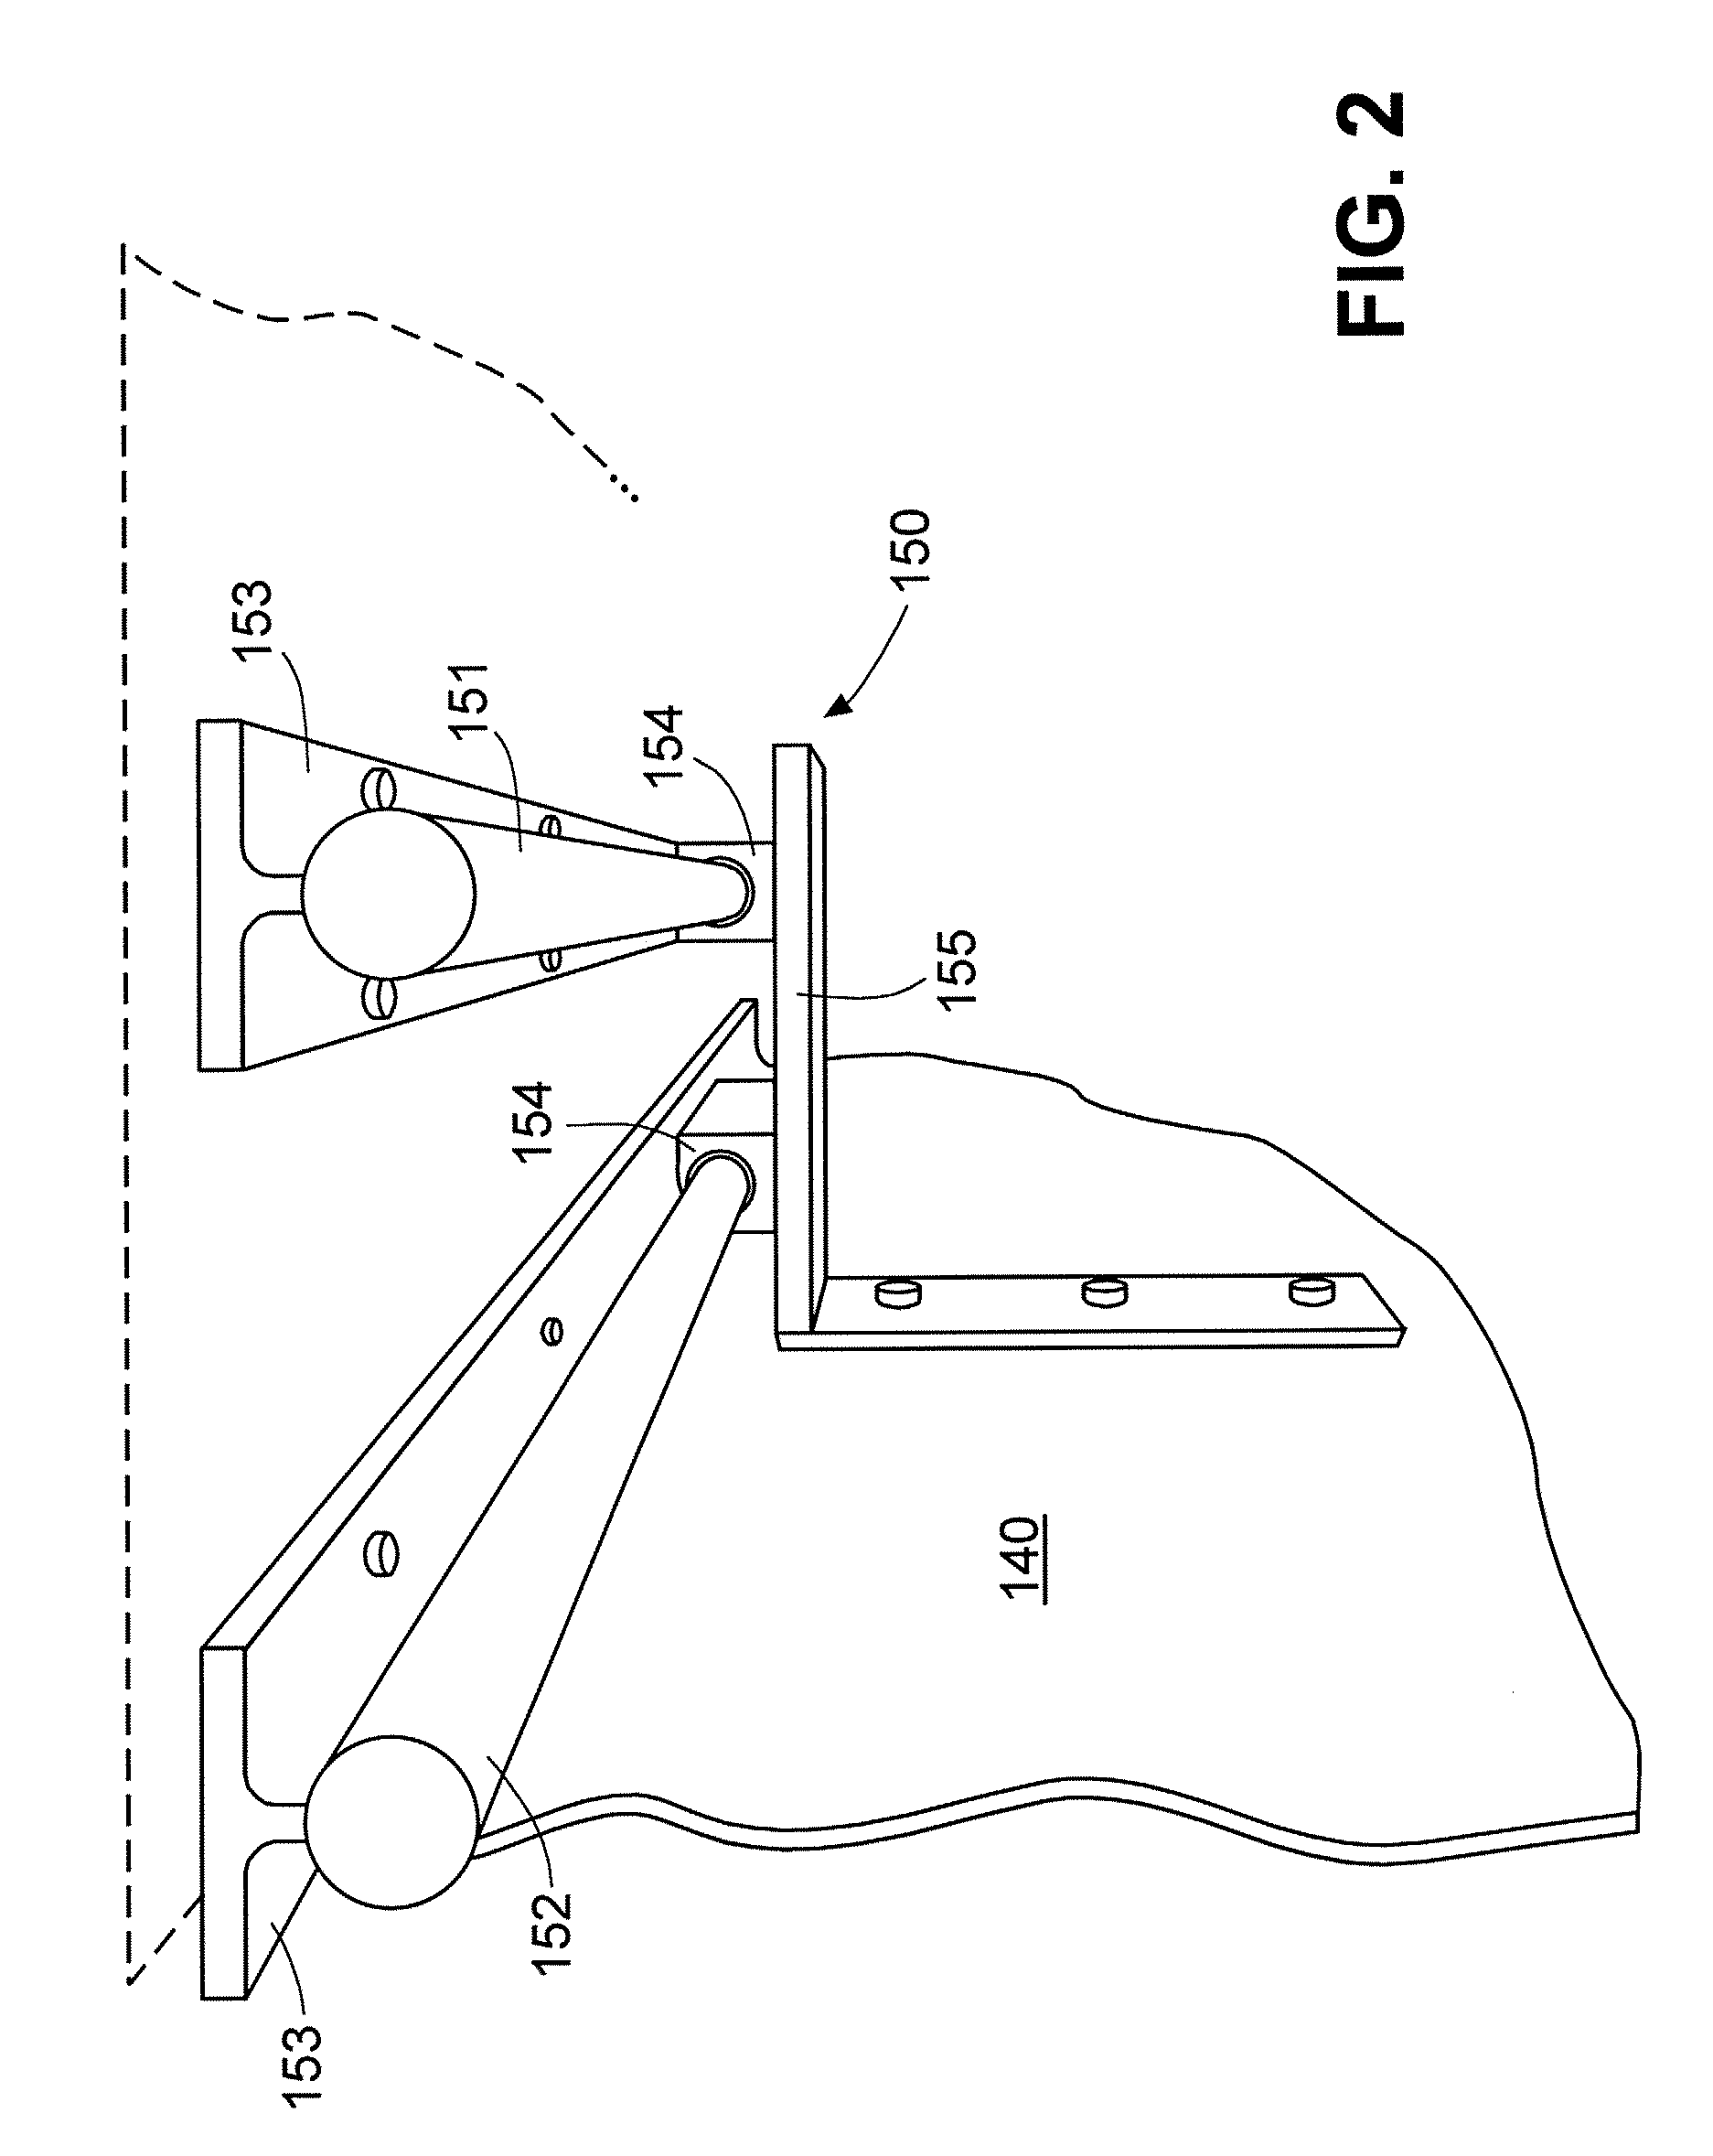 Vehicle side fairing system